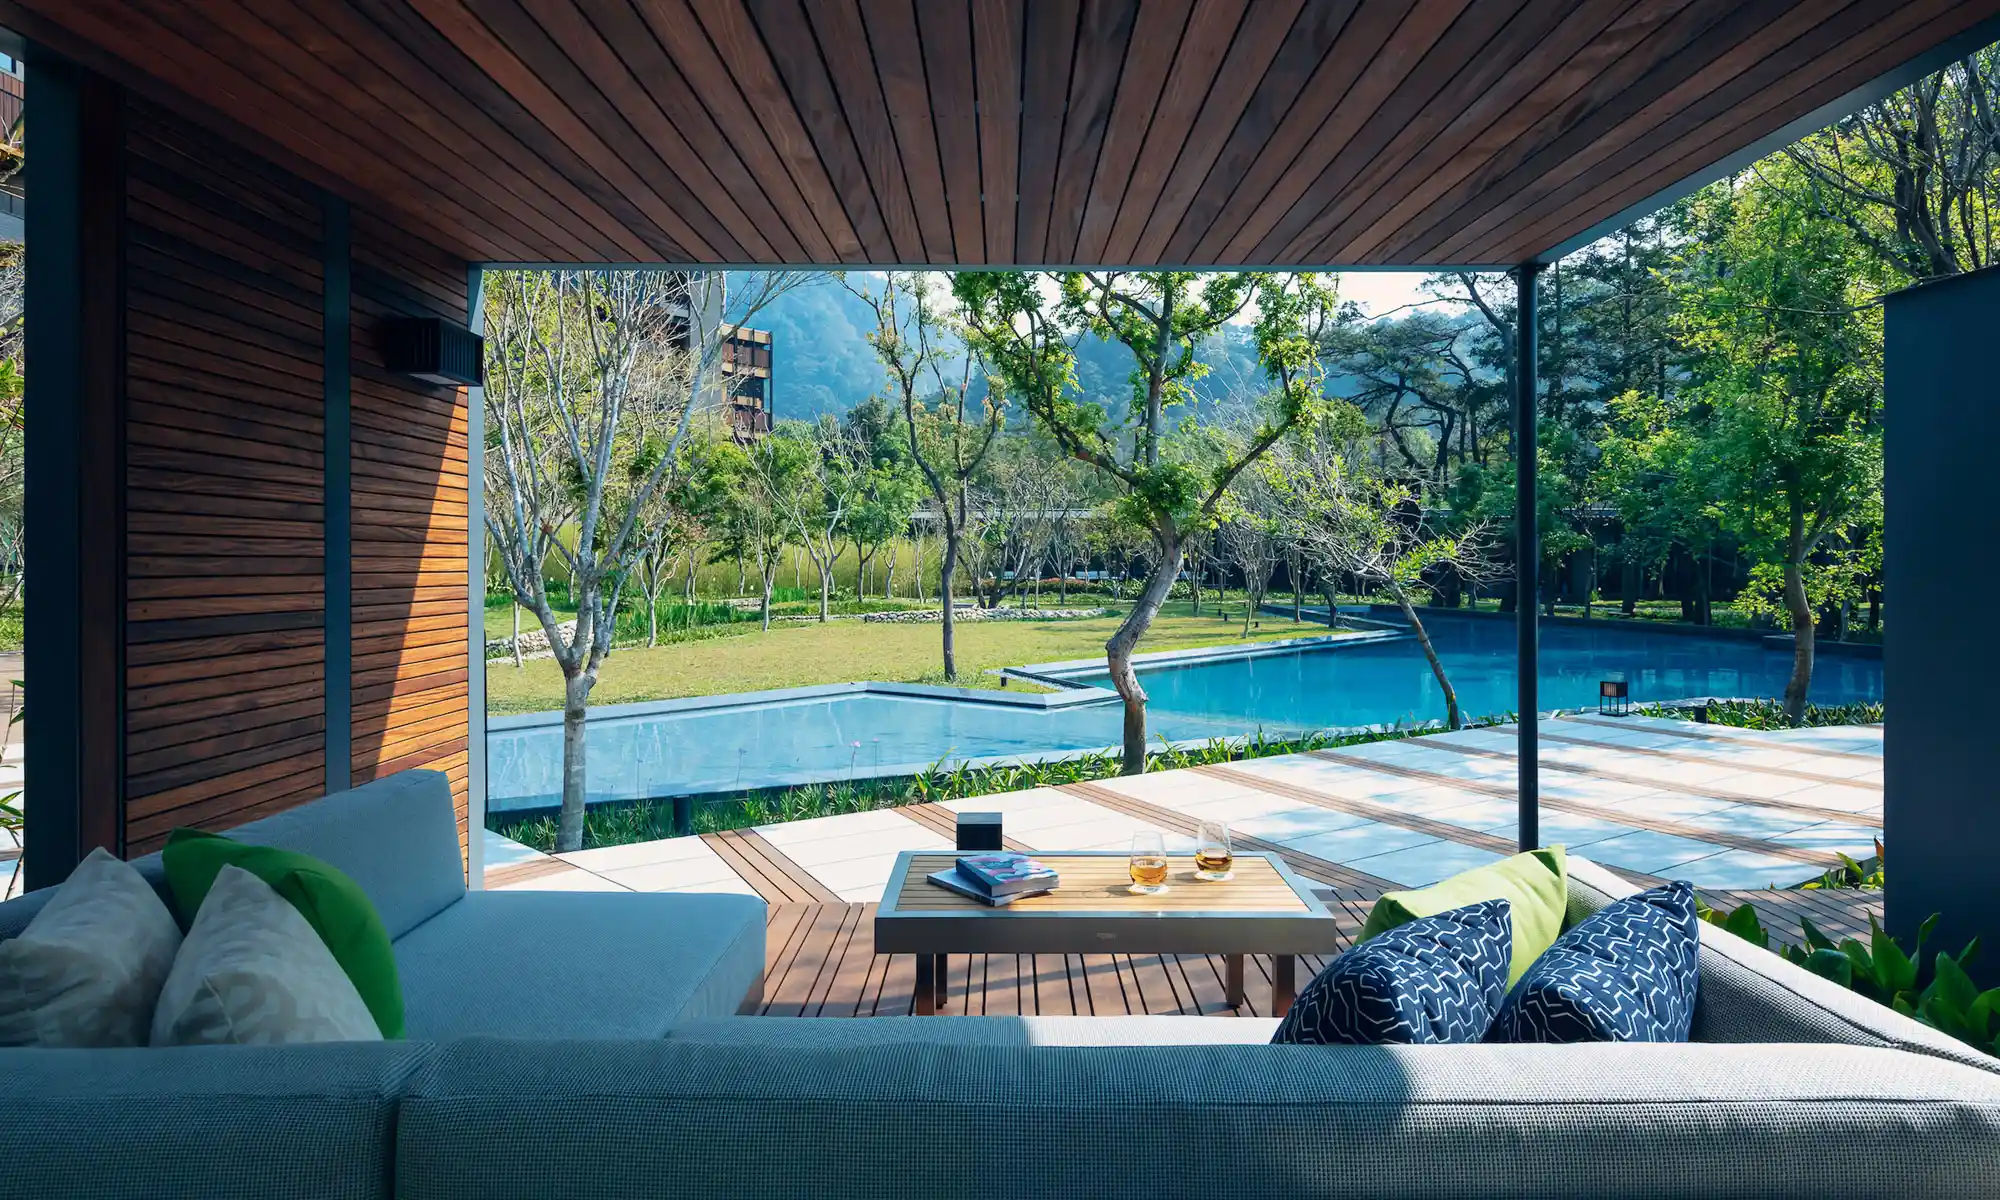 An outdoor poolside lounging area is surrounded by lush gardens at Hoshinoya Guguan.